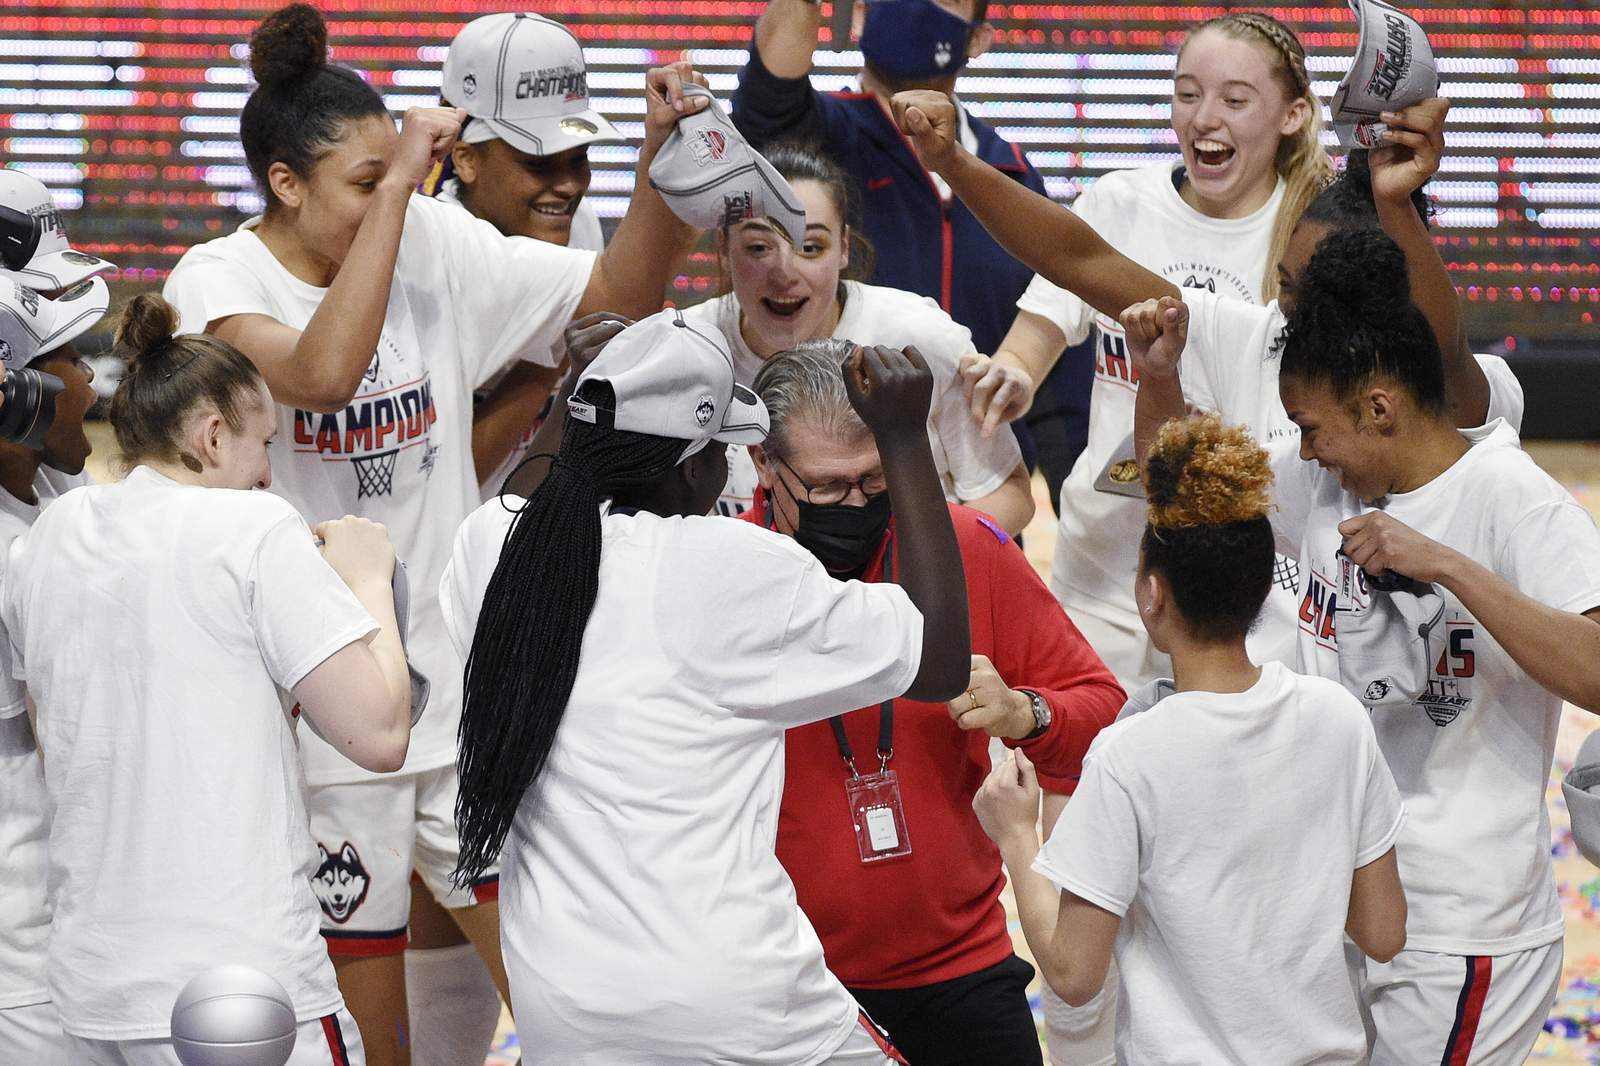 UConn finishes No. 1 in women's AP Top 25 for 16th time